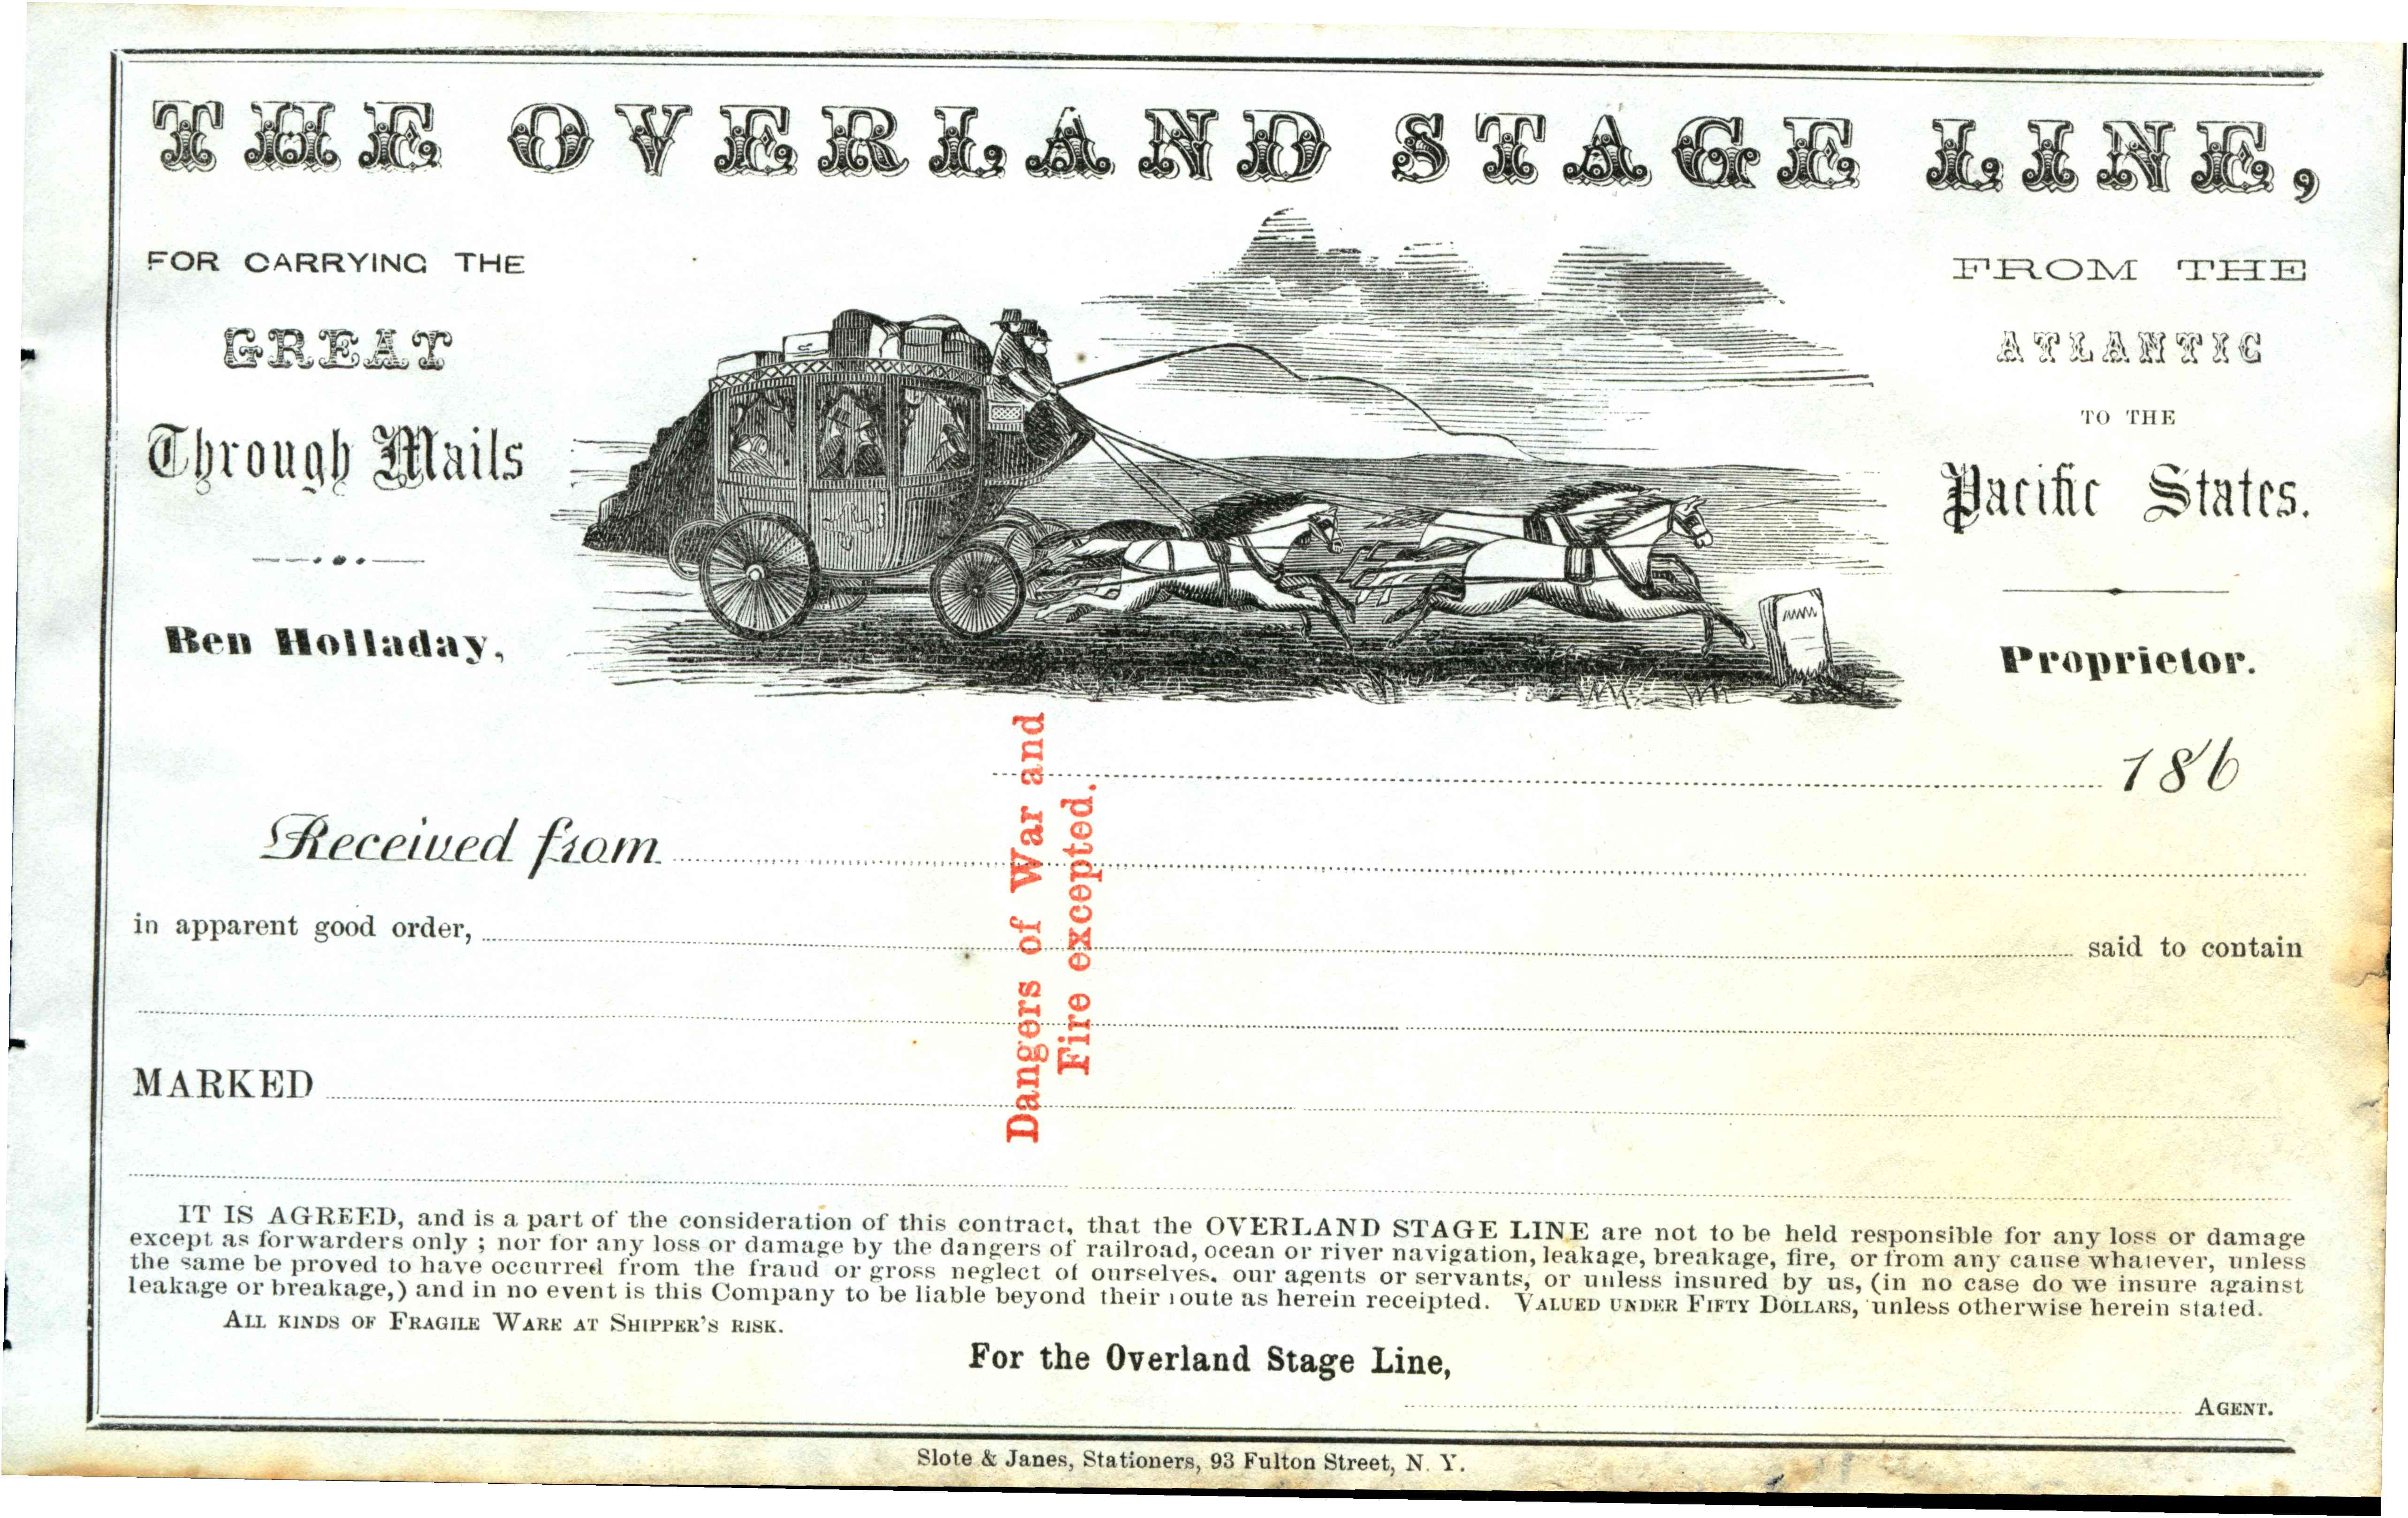 Receipt with Stagecoach and horses